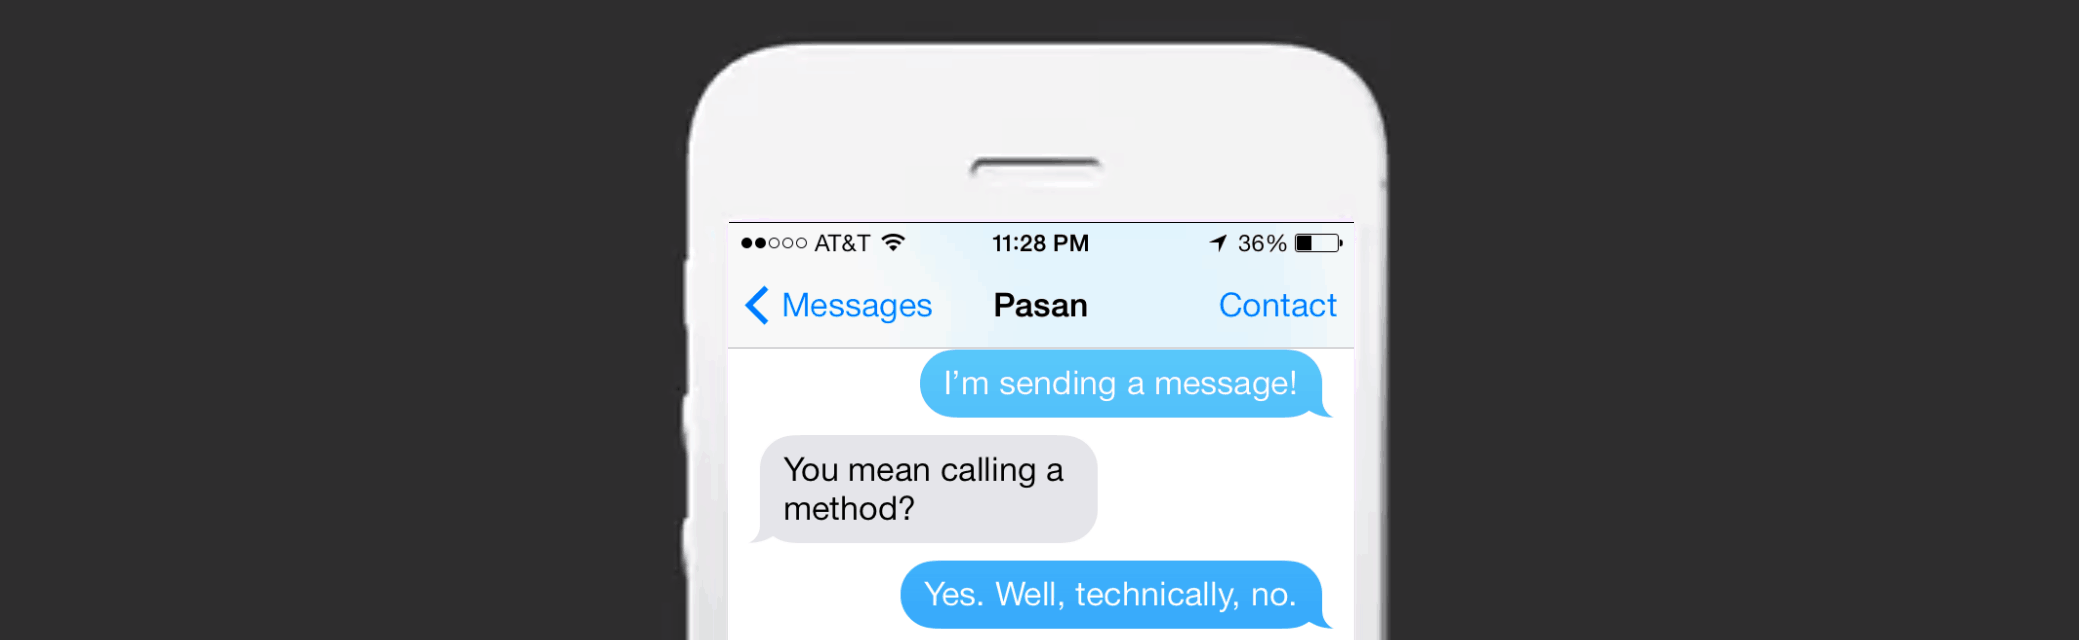 "I'm sending a message!" "You mean calling a method?" "Yes. Well, technically, no."